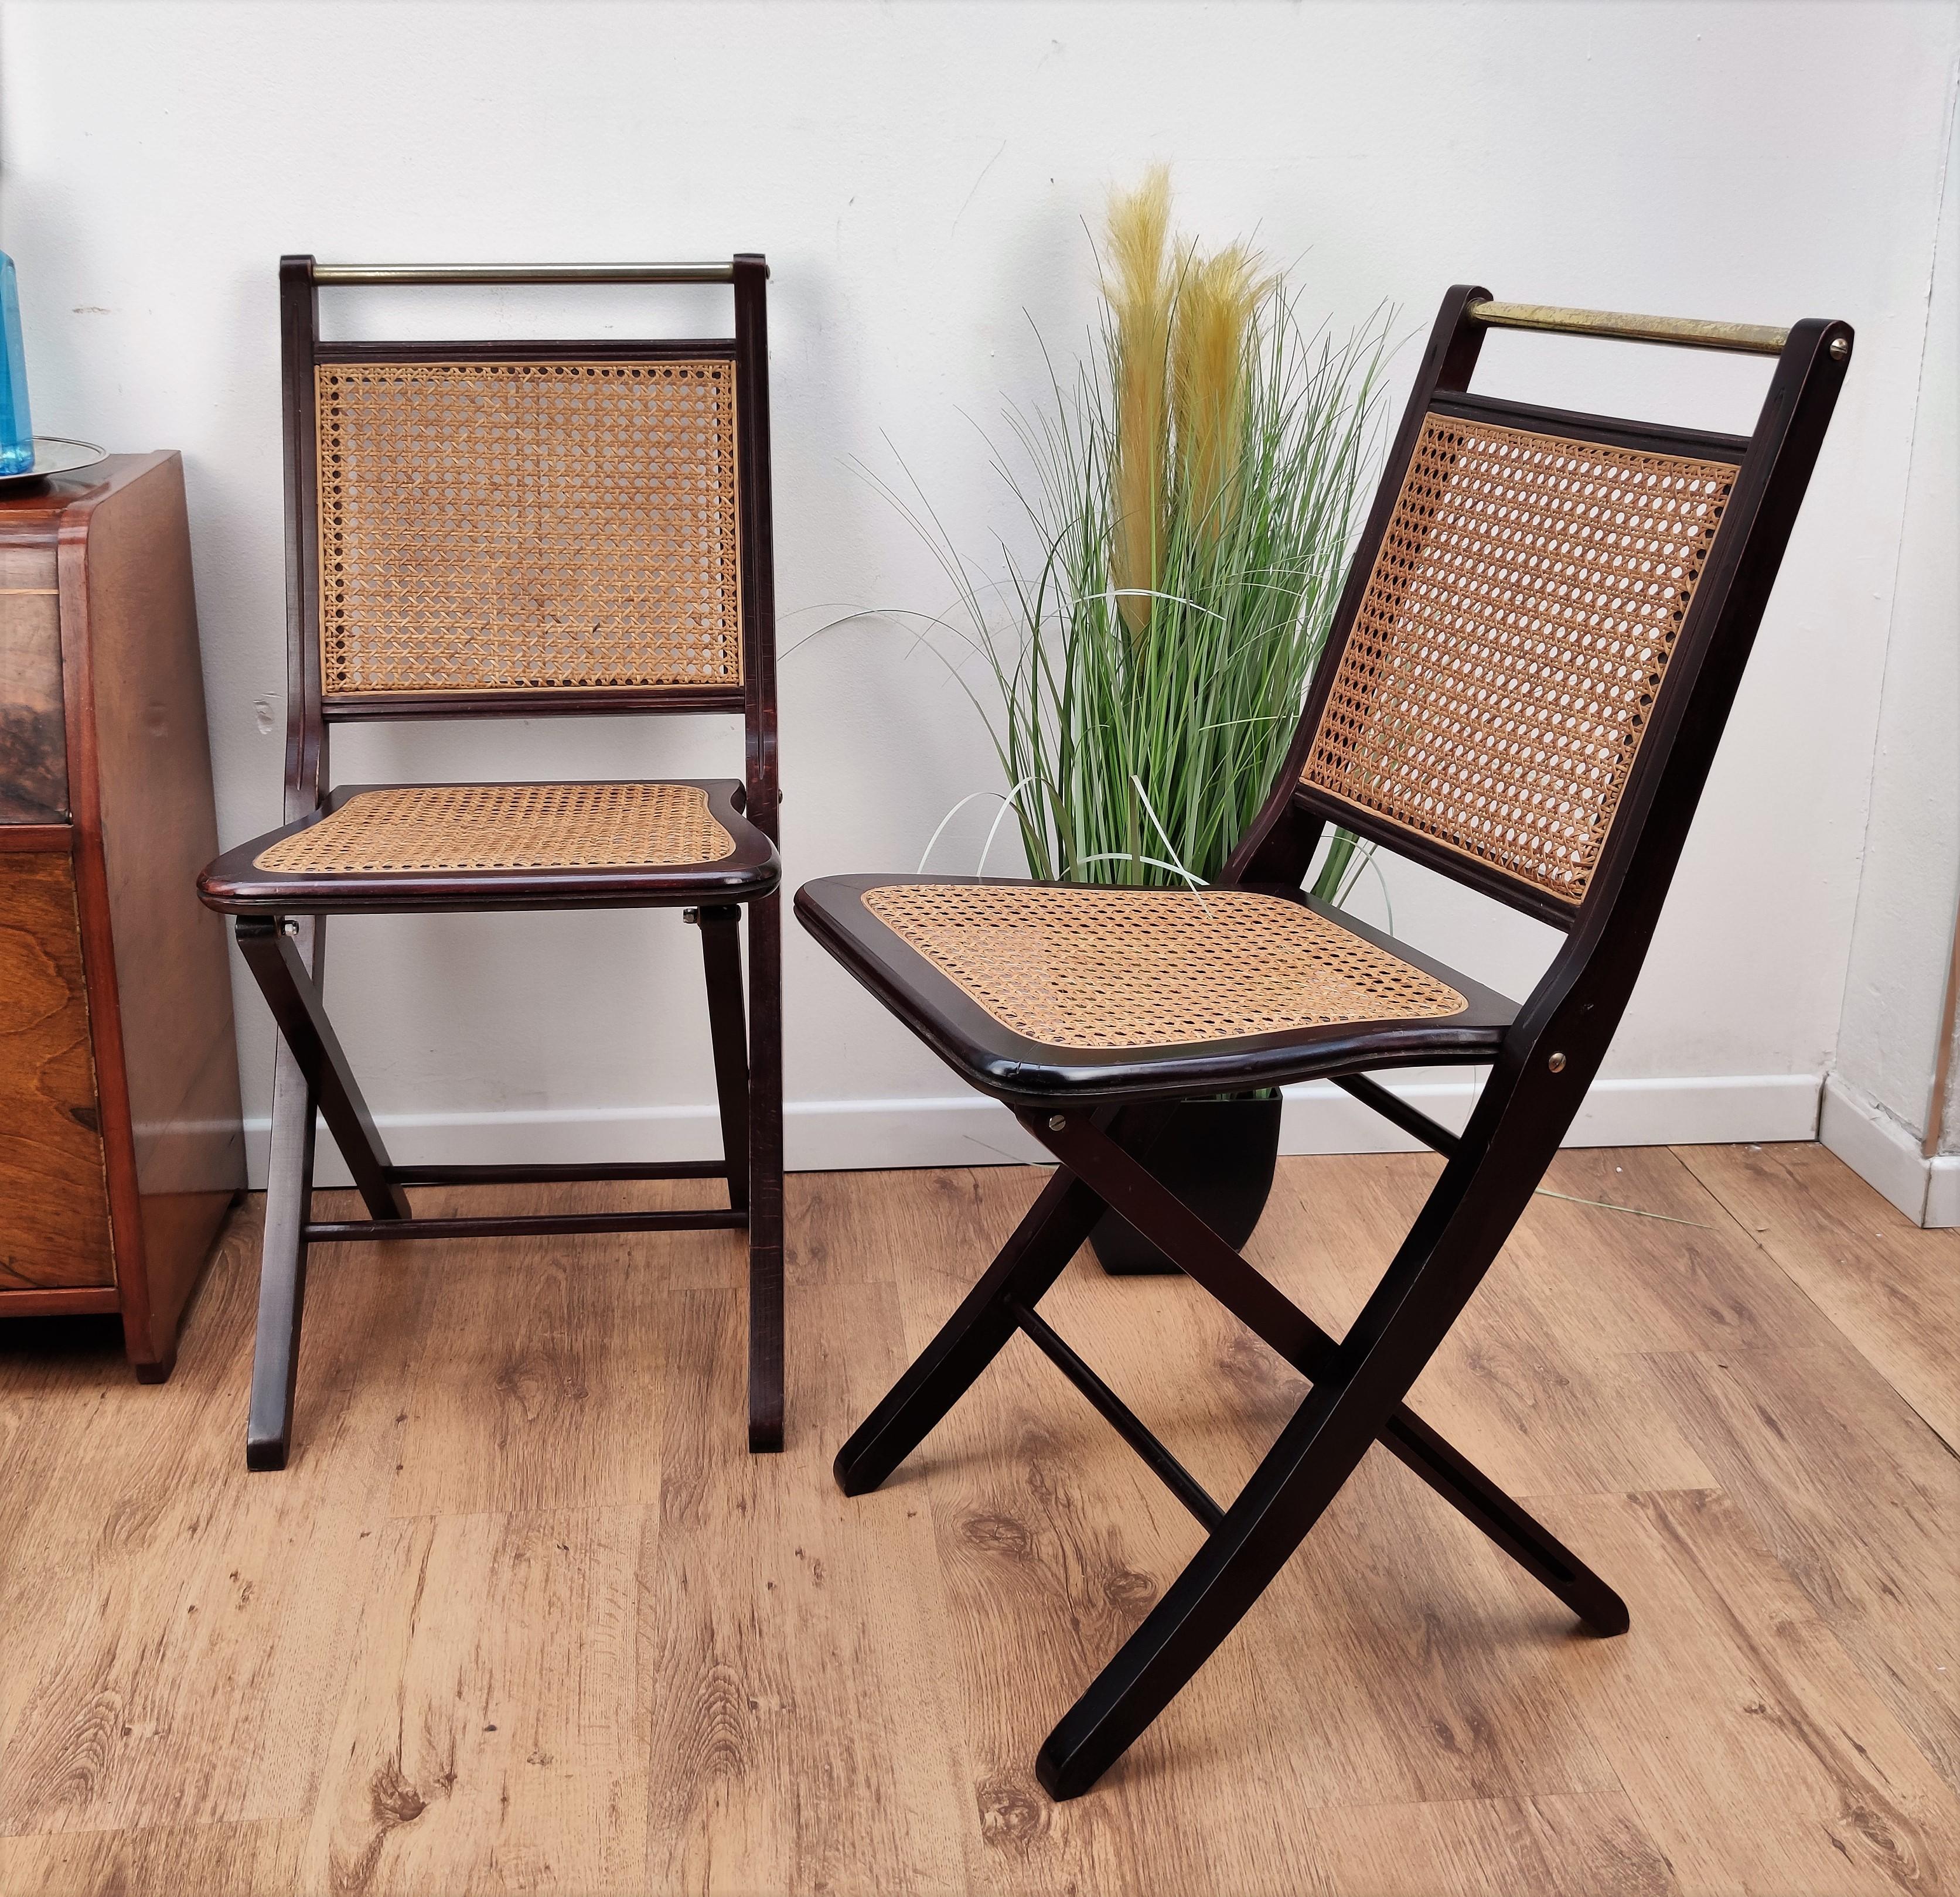 Caning Pair of Italian Midcentury Wood, Brass and Rattan Folding Chairs